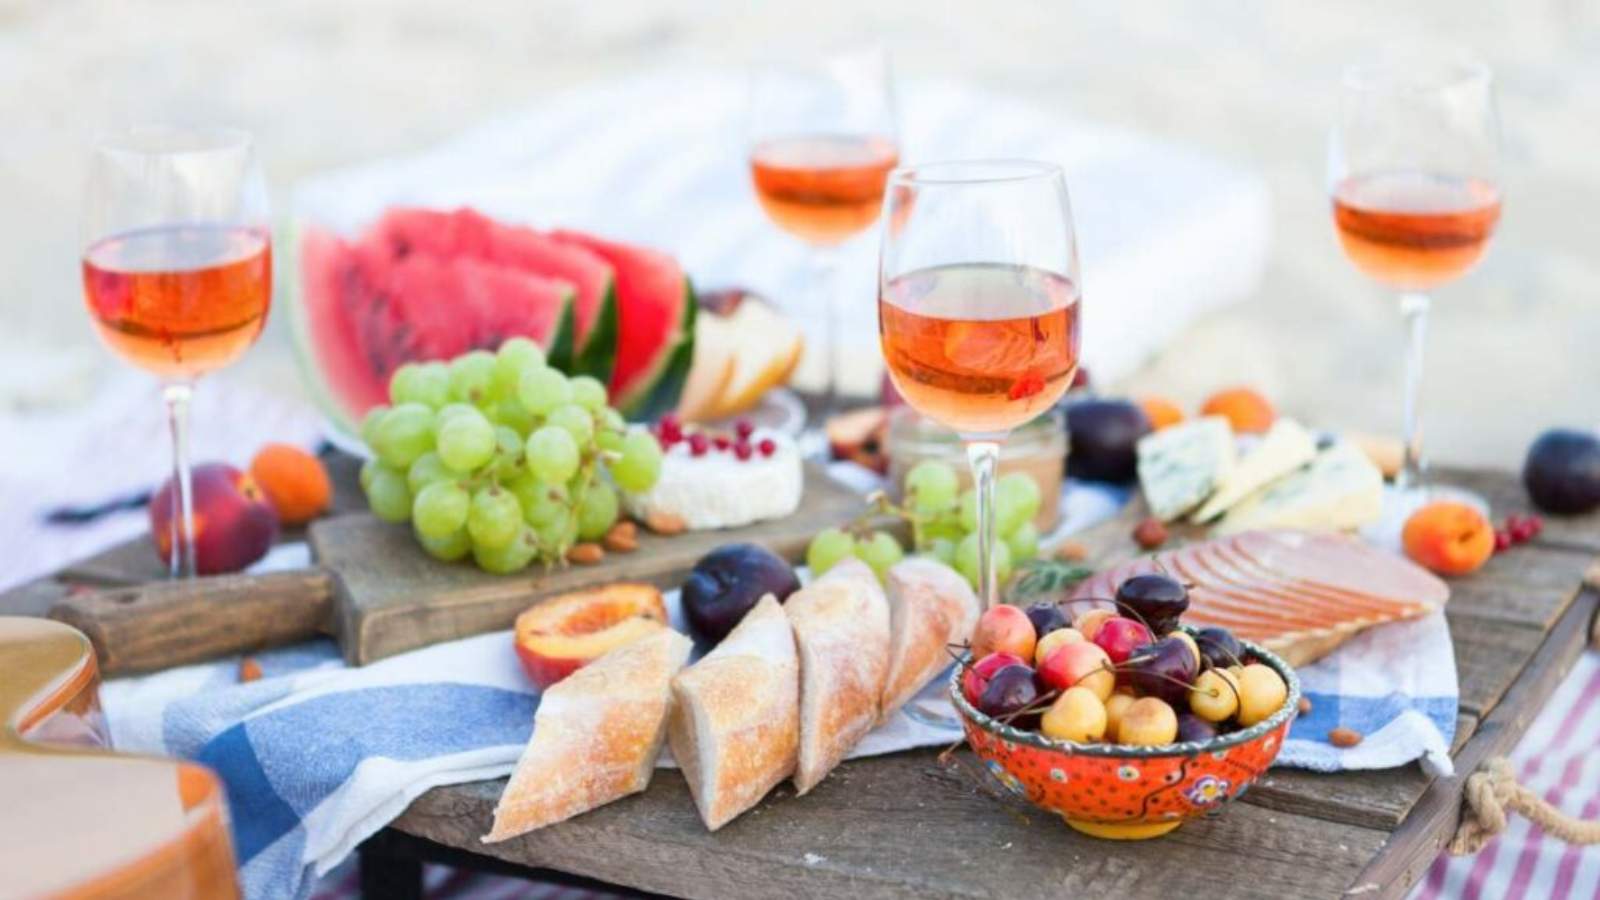 A beach charcuterie board with glasses of rosé wine, a variety of fruits and sliced baguette.